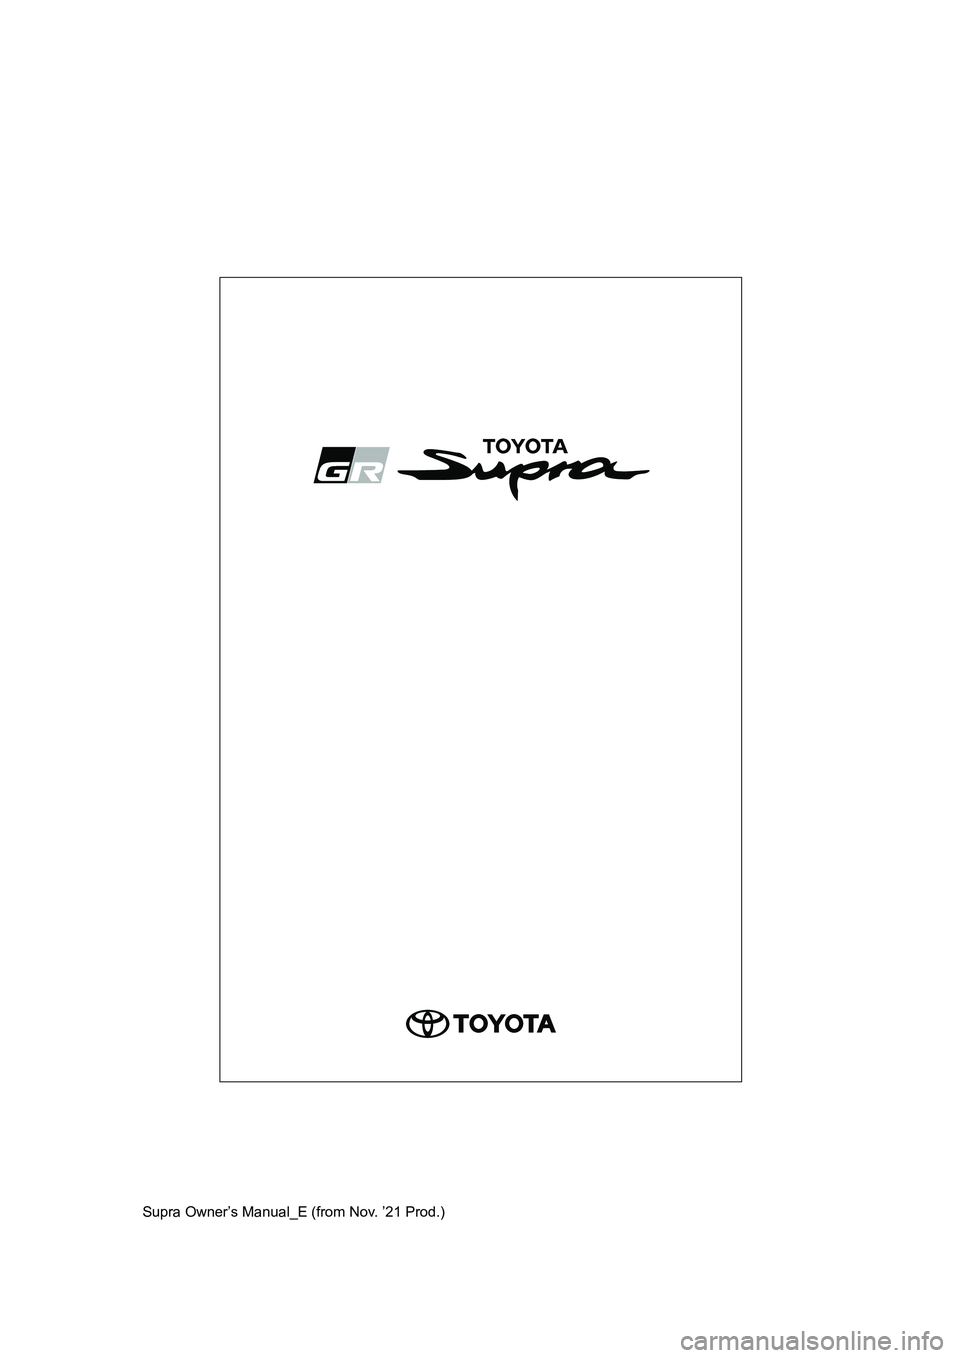 TOYOTA SUPRA 2022  Owners Manual Supra Owner’s Manual_E (from Nov. ’21 Prod.) 